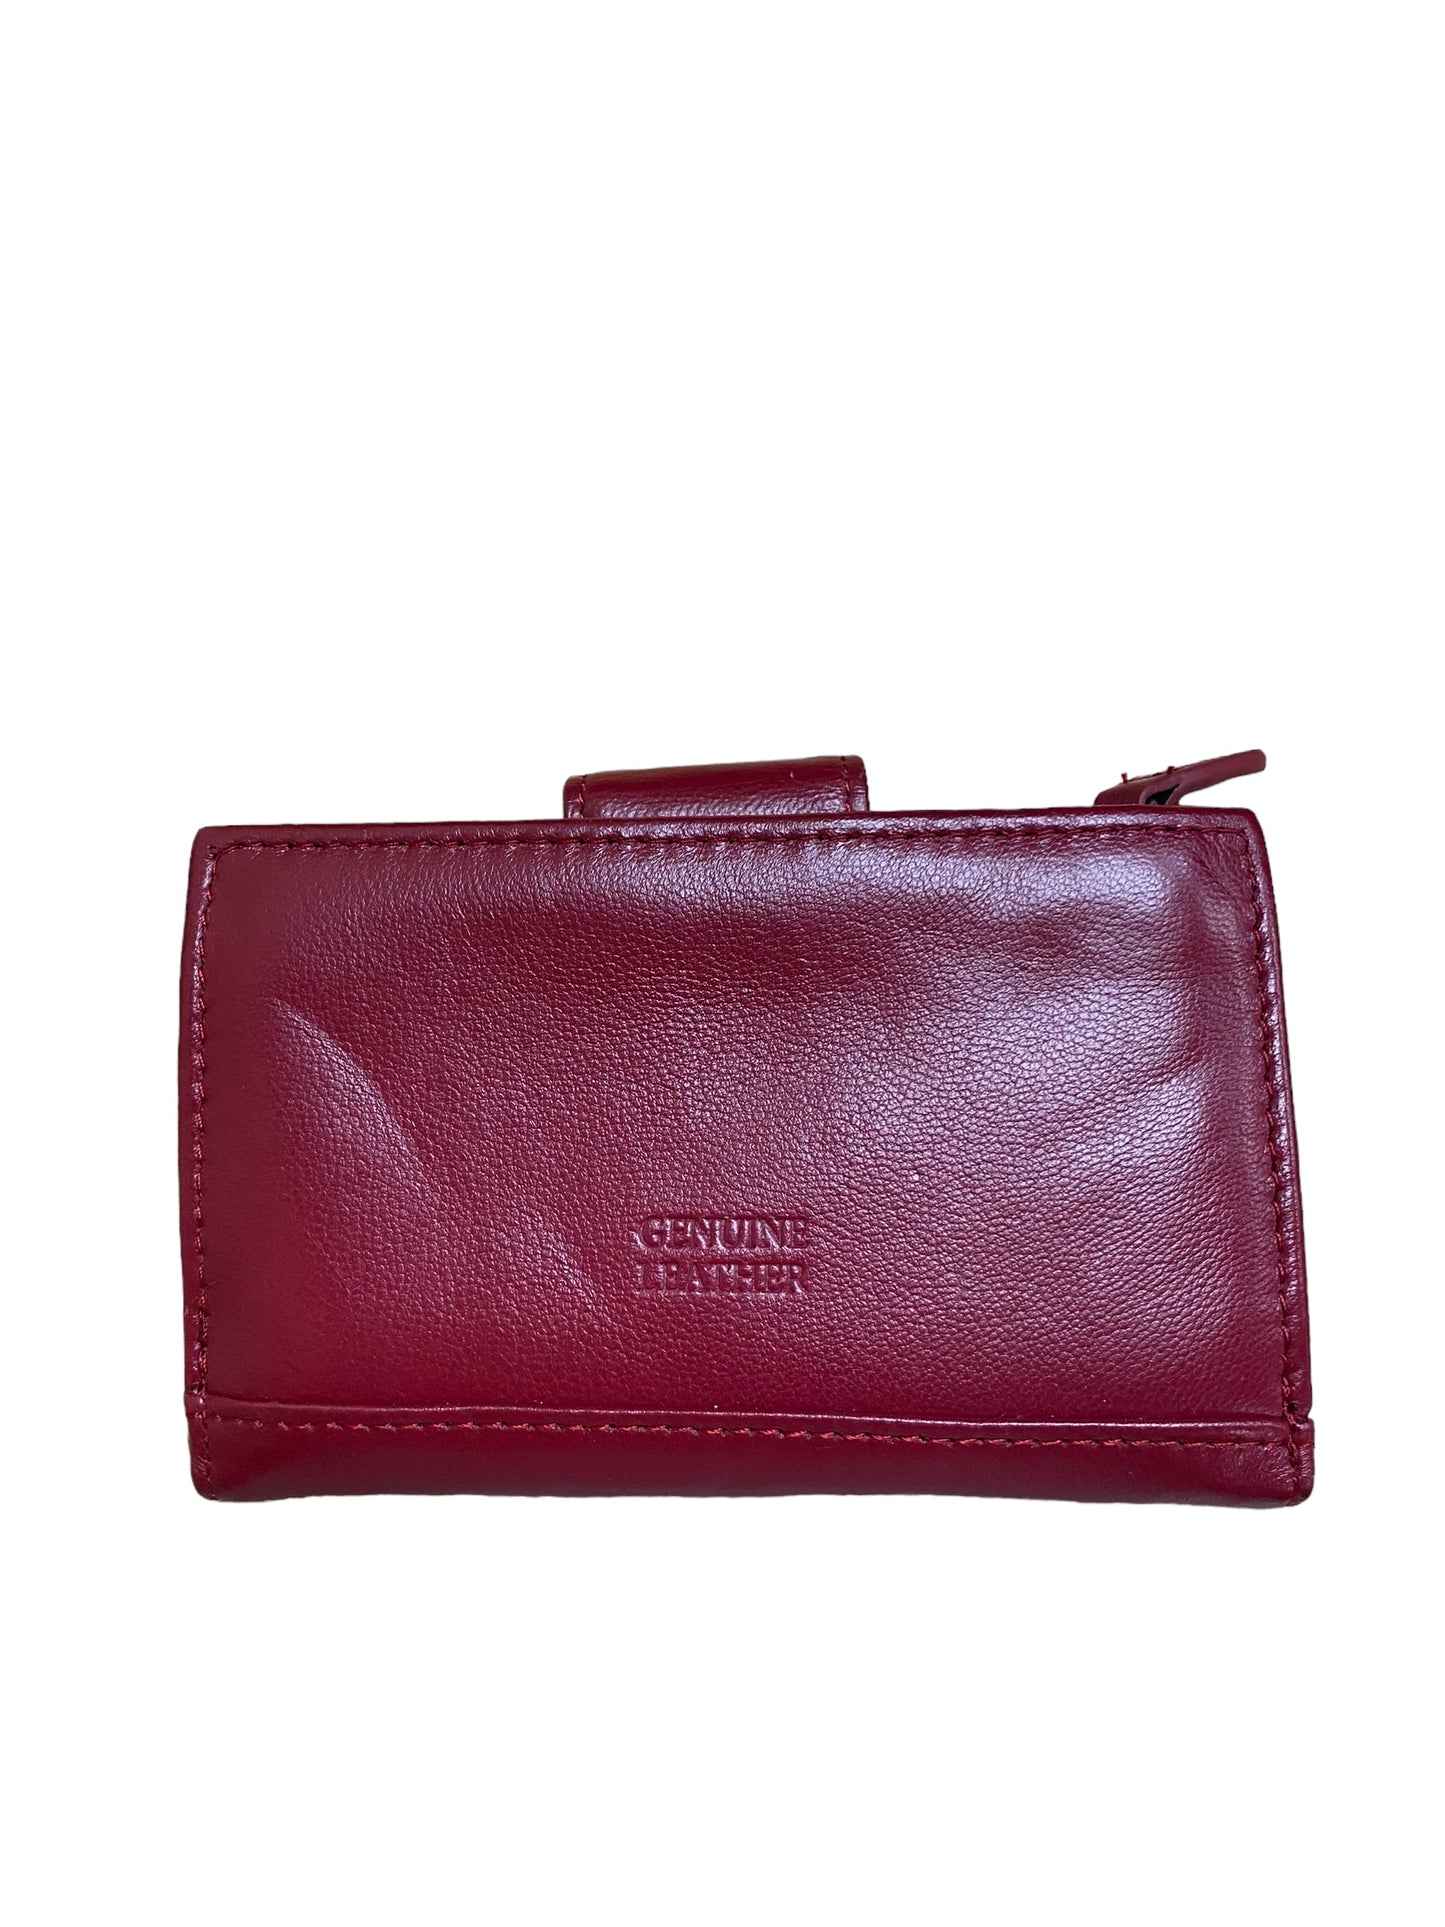 Wallet Leather By Clothes Mentor  Size: Small